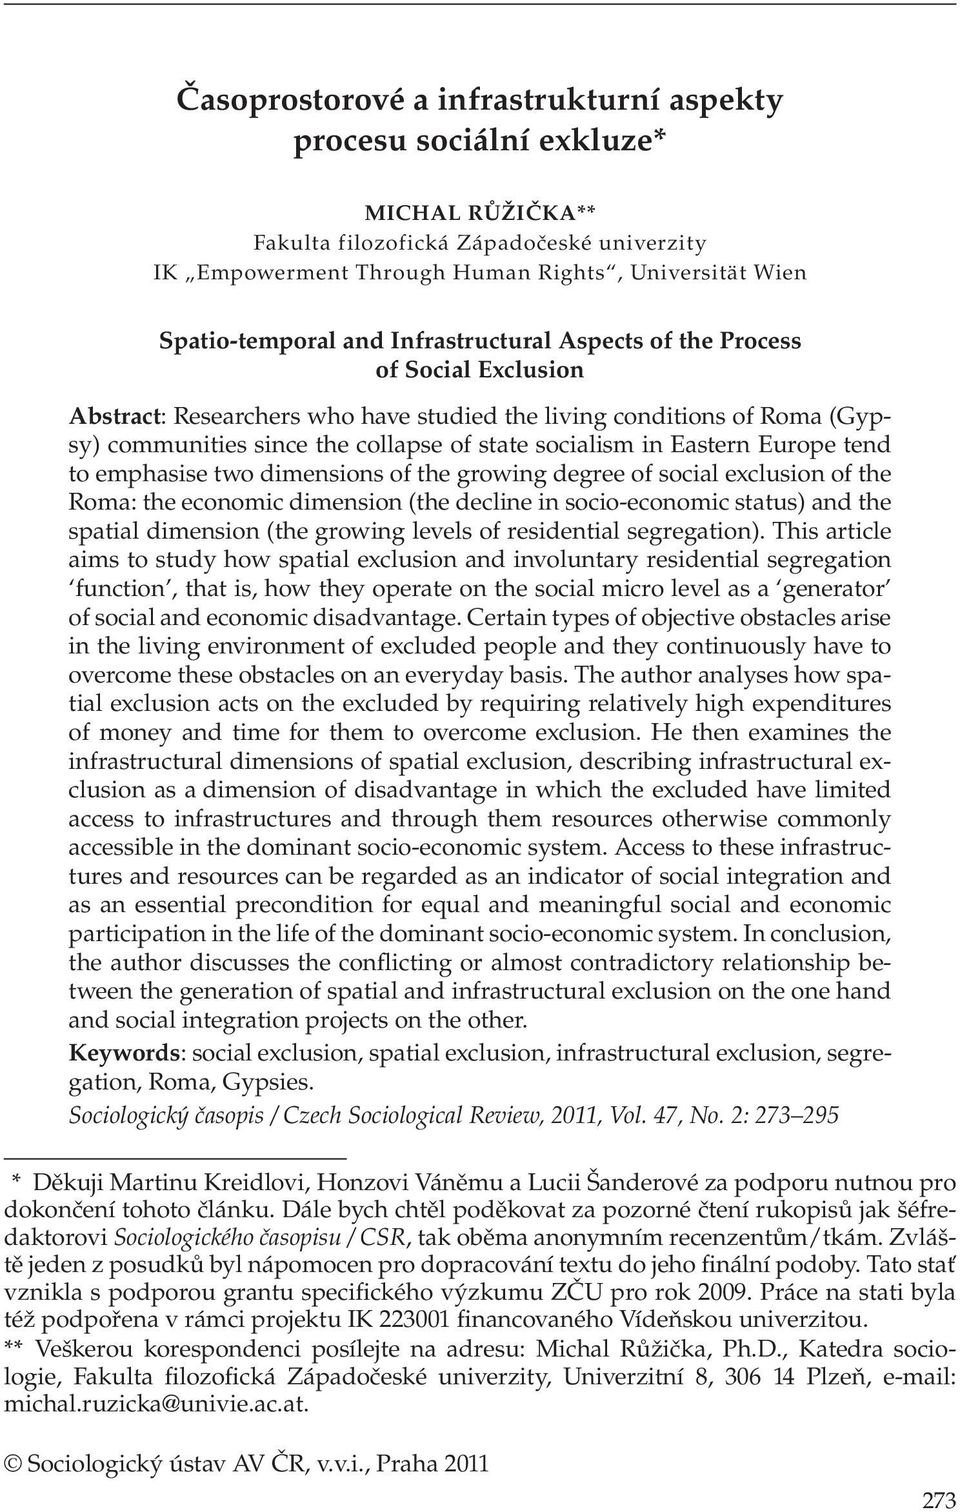 Eastern Europe tend to emphasise two dimensions of the growing degree of social exclusion of the Roma: the economic dimension (the decline in socio-economic status) and the spatial dimension (the